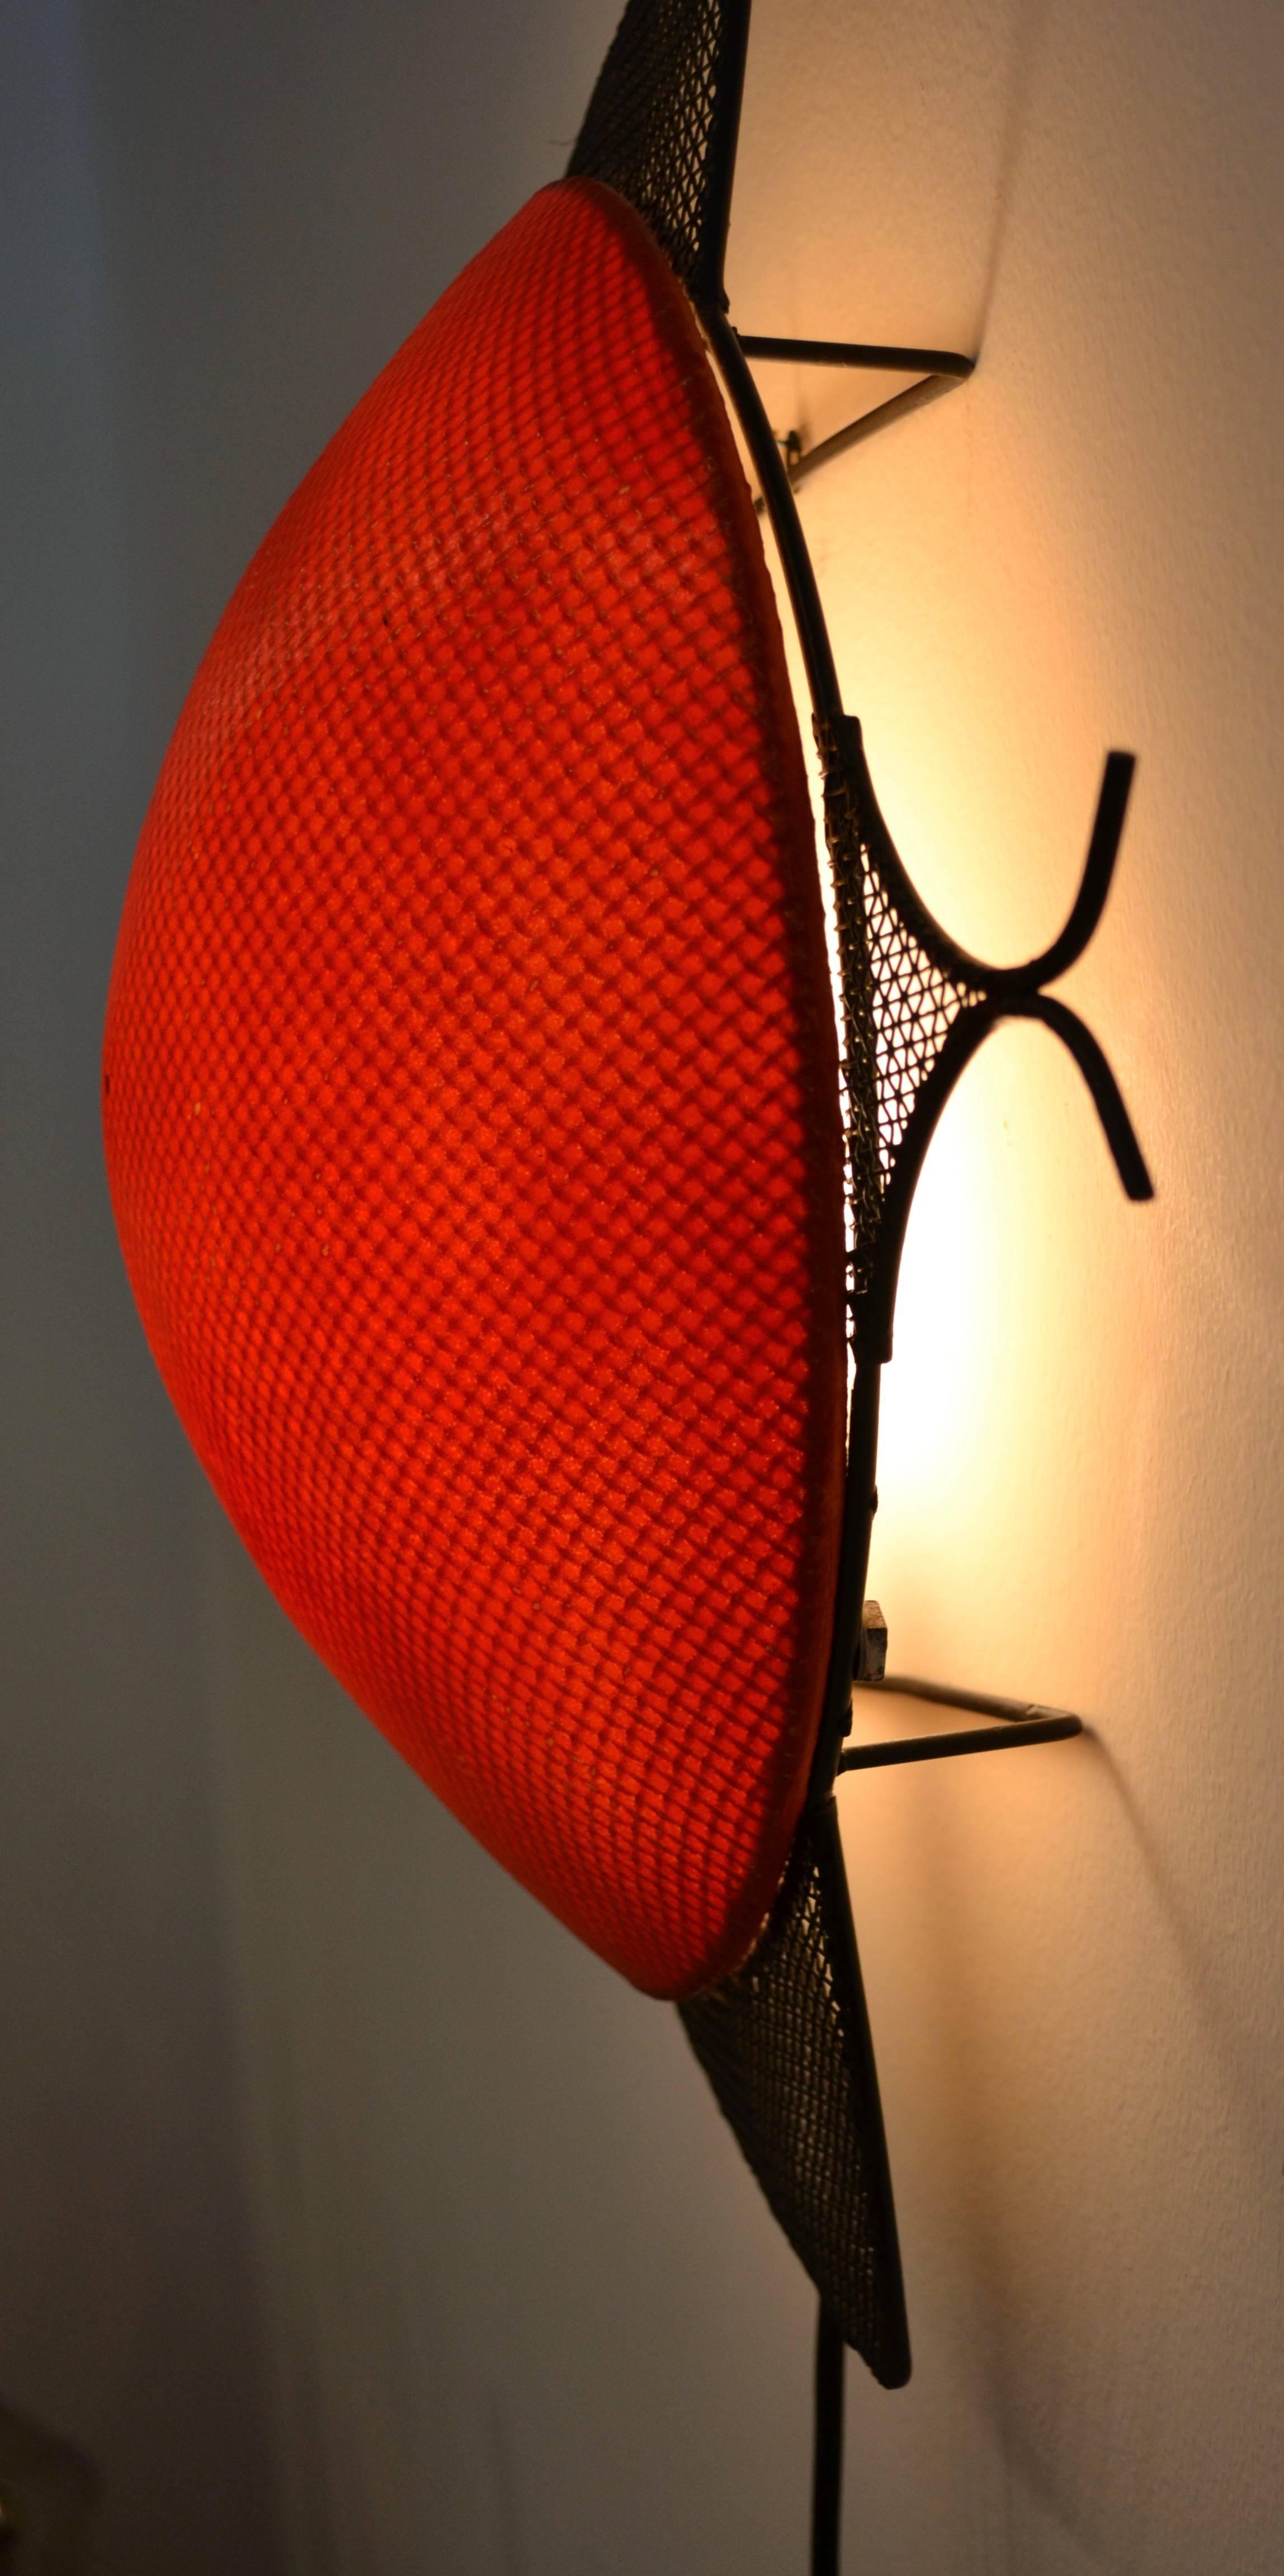 Awesome red and black mesh fish lamp by Frederick Weinberg, all original, 1950s.